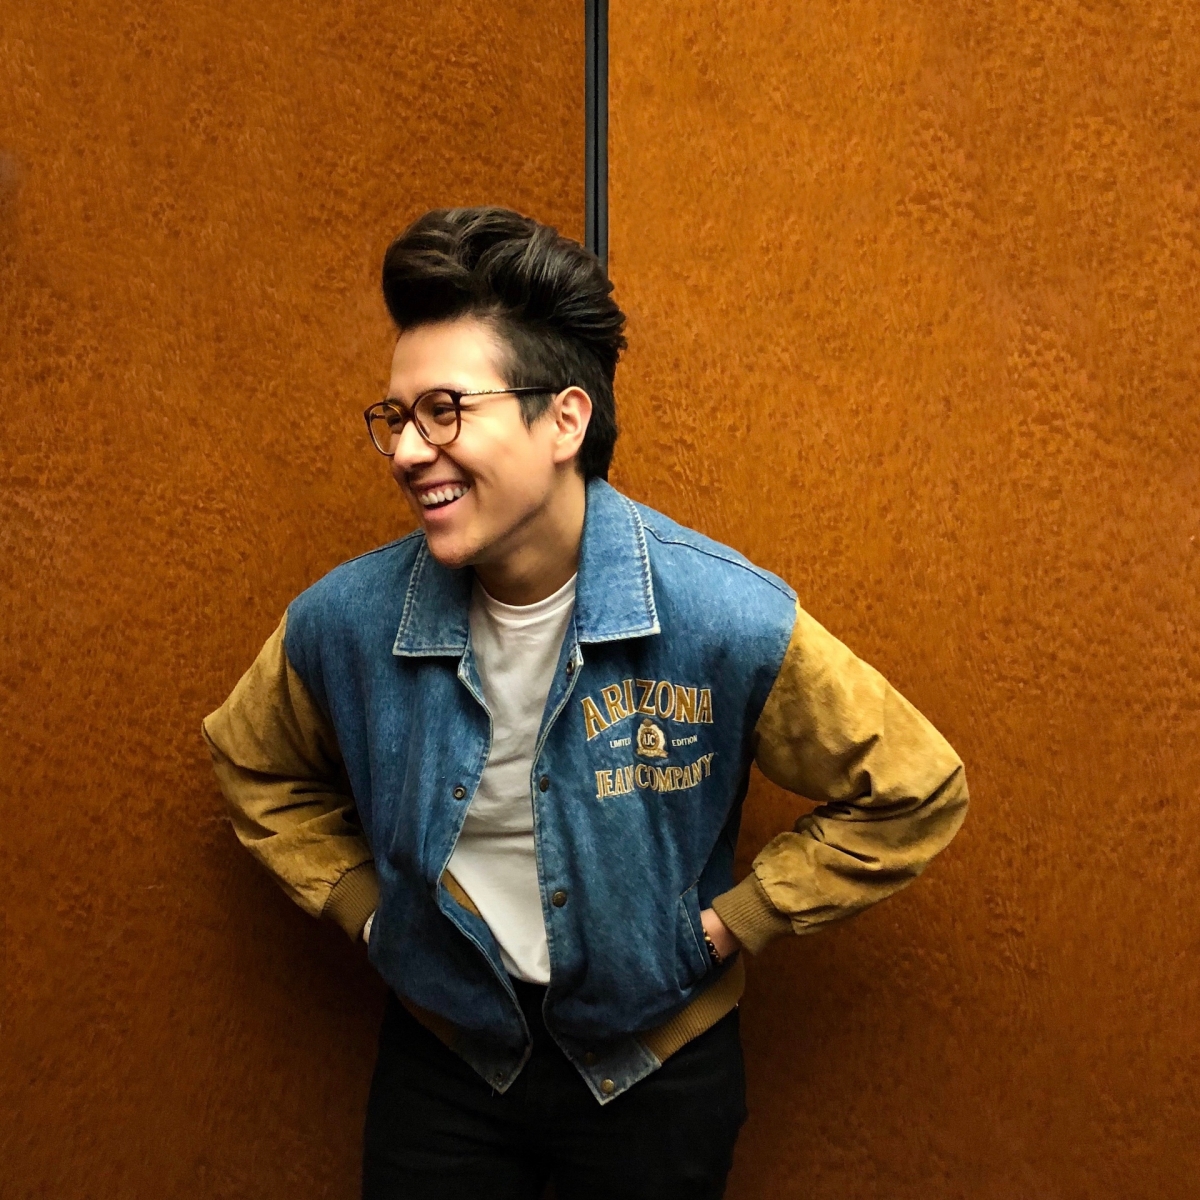 Antonio wears glasses and a denim jacket with suede sleeves, smiling away from the camera. 